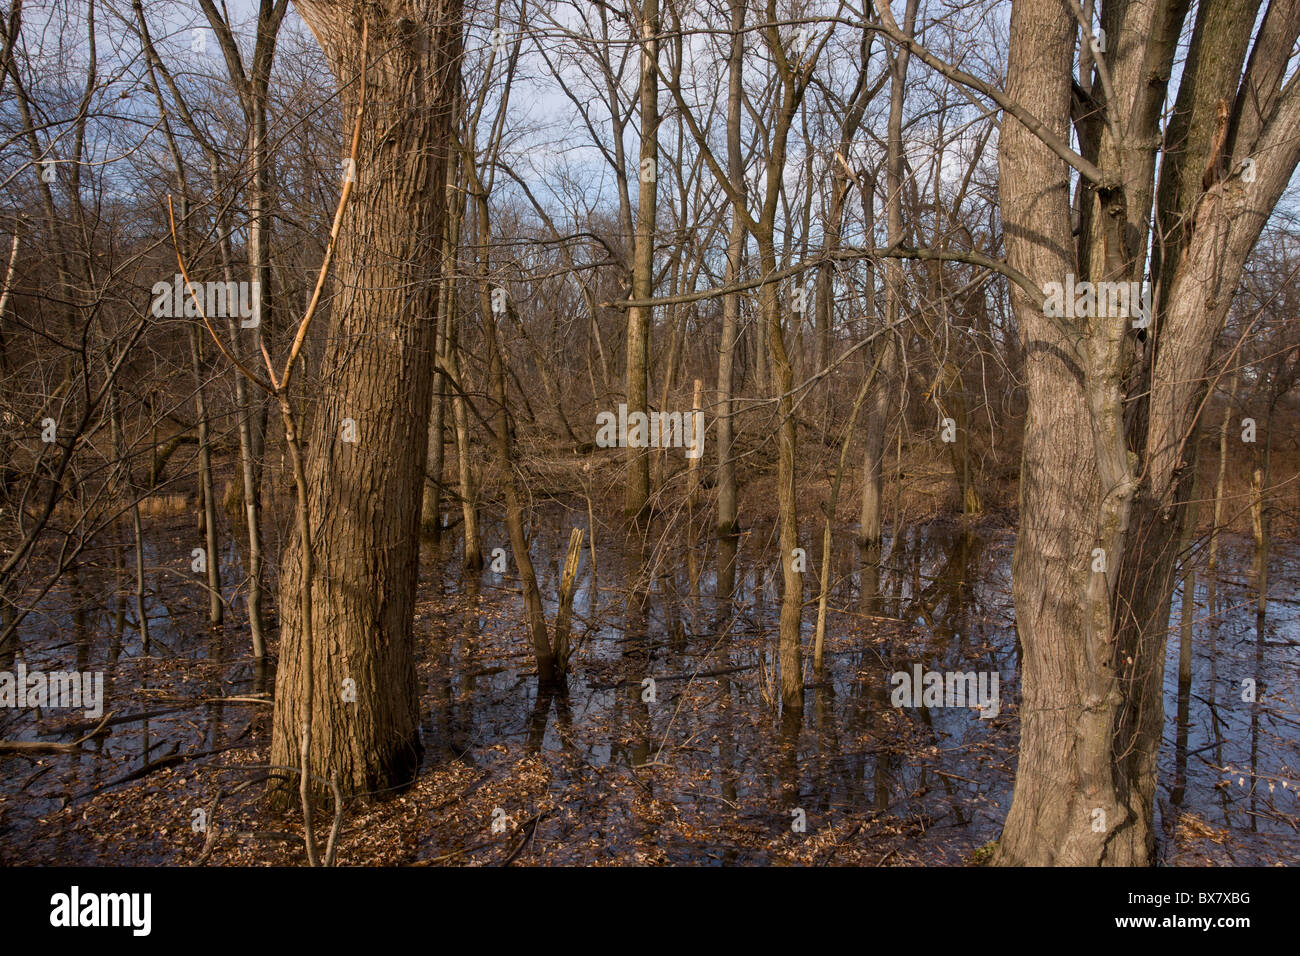 Valley woodland of Eastern Cottonwood (poplar) trees along the Mohawk River, near Albany, New York State. Stock Photo